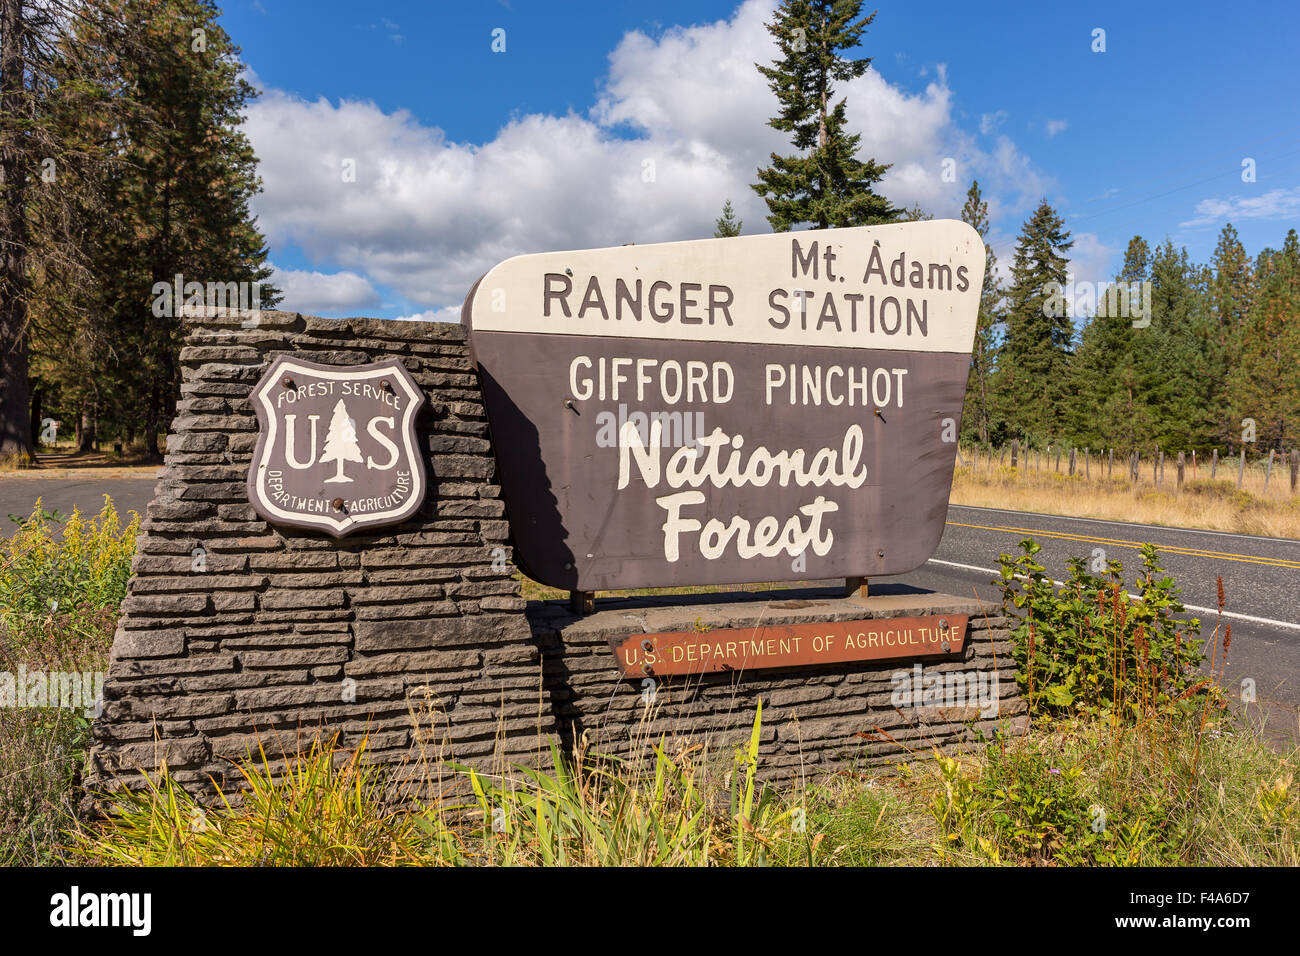 TROUT LAKE, Washington, USA - Mont Adams signe Ranger Station, Gifford Pinchot National Forest. Banque D'Images